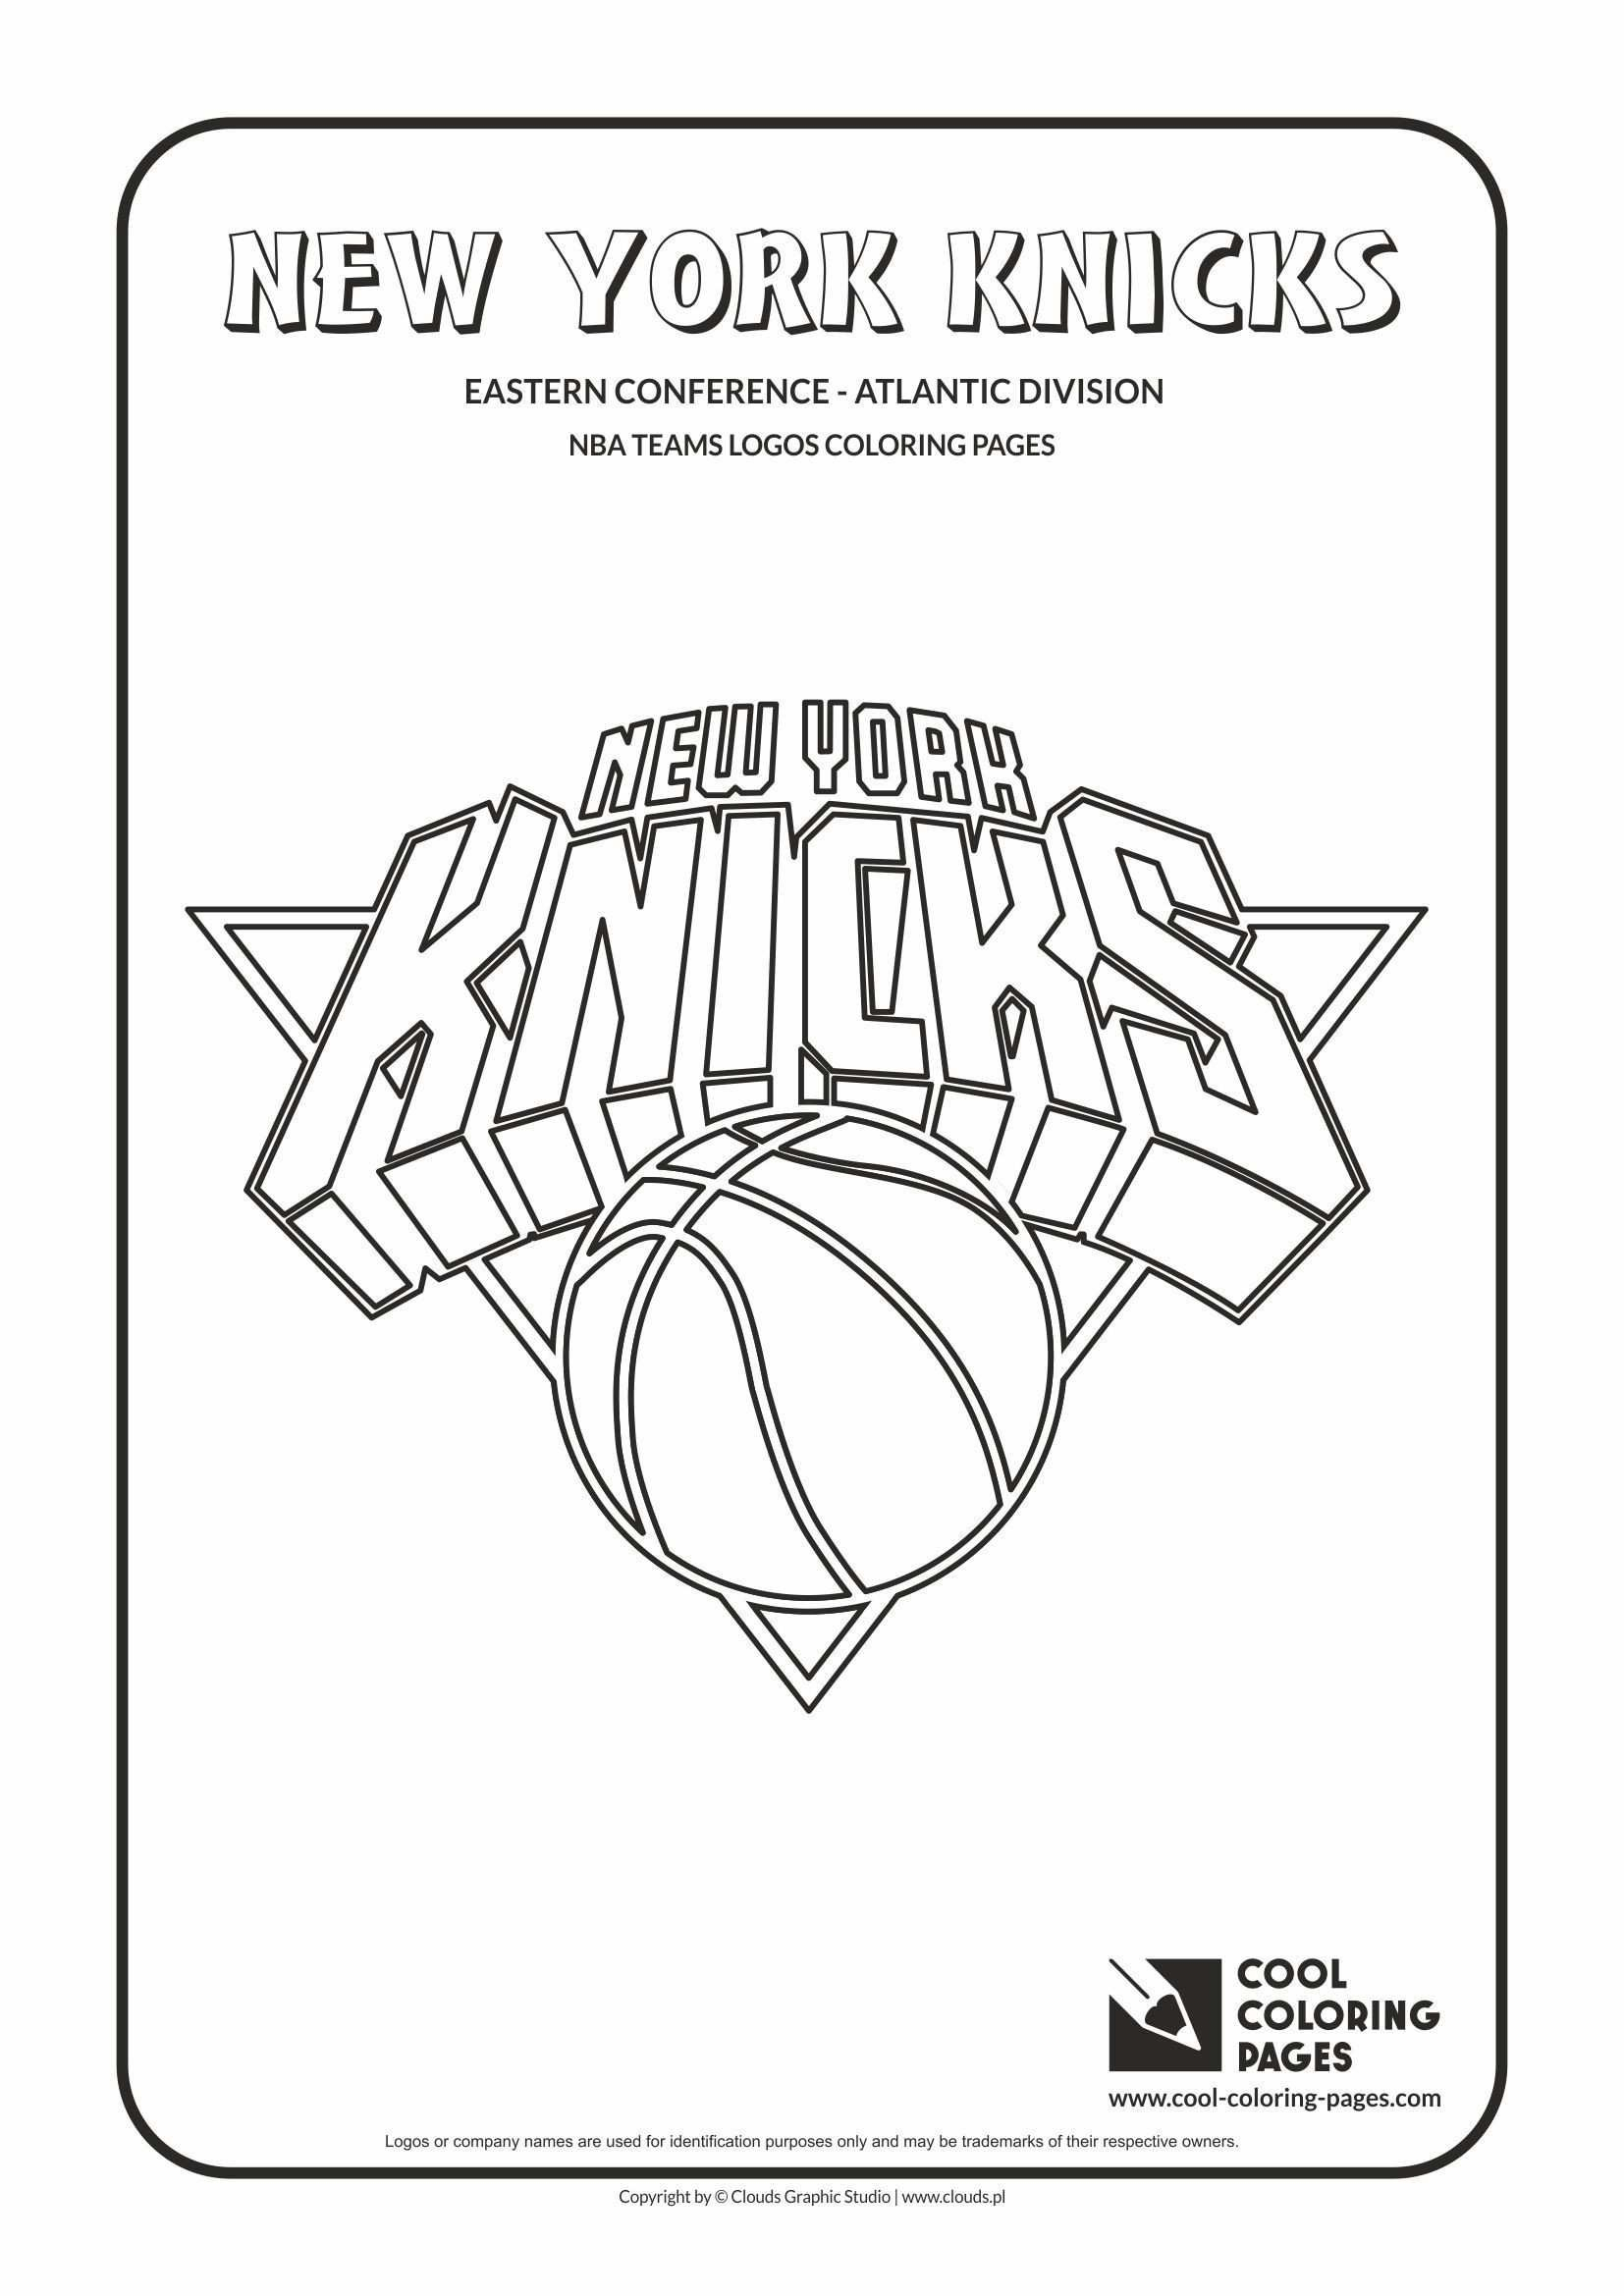 Skyline Coloring Pages Coloring Chicago Bulls Coloring Pages New Photography Nba